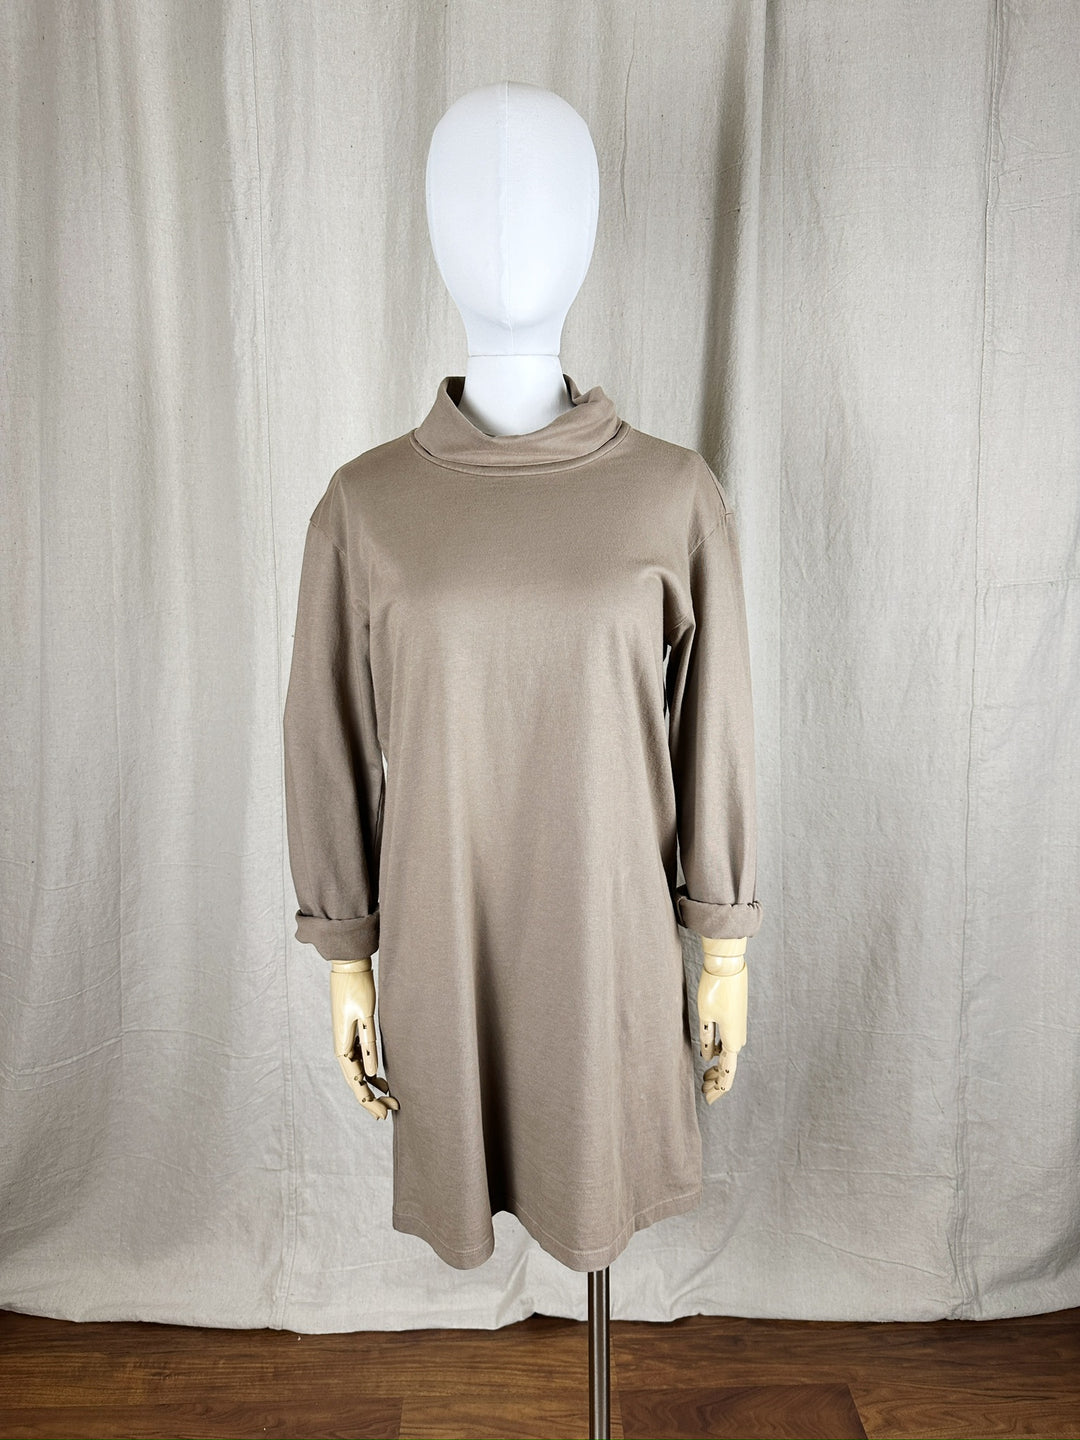 A close up image of the Jersey Turtleneck Dress shown on a female mannequin form